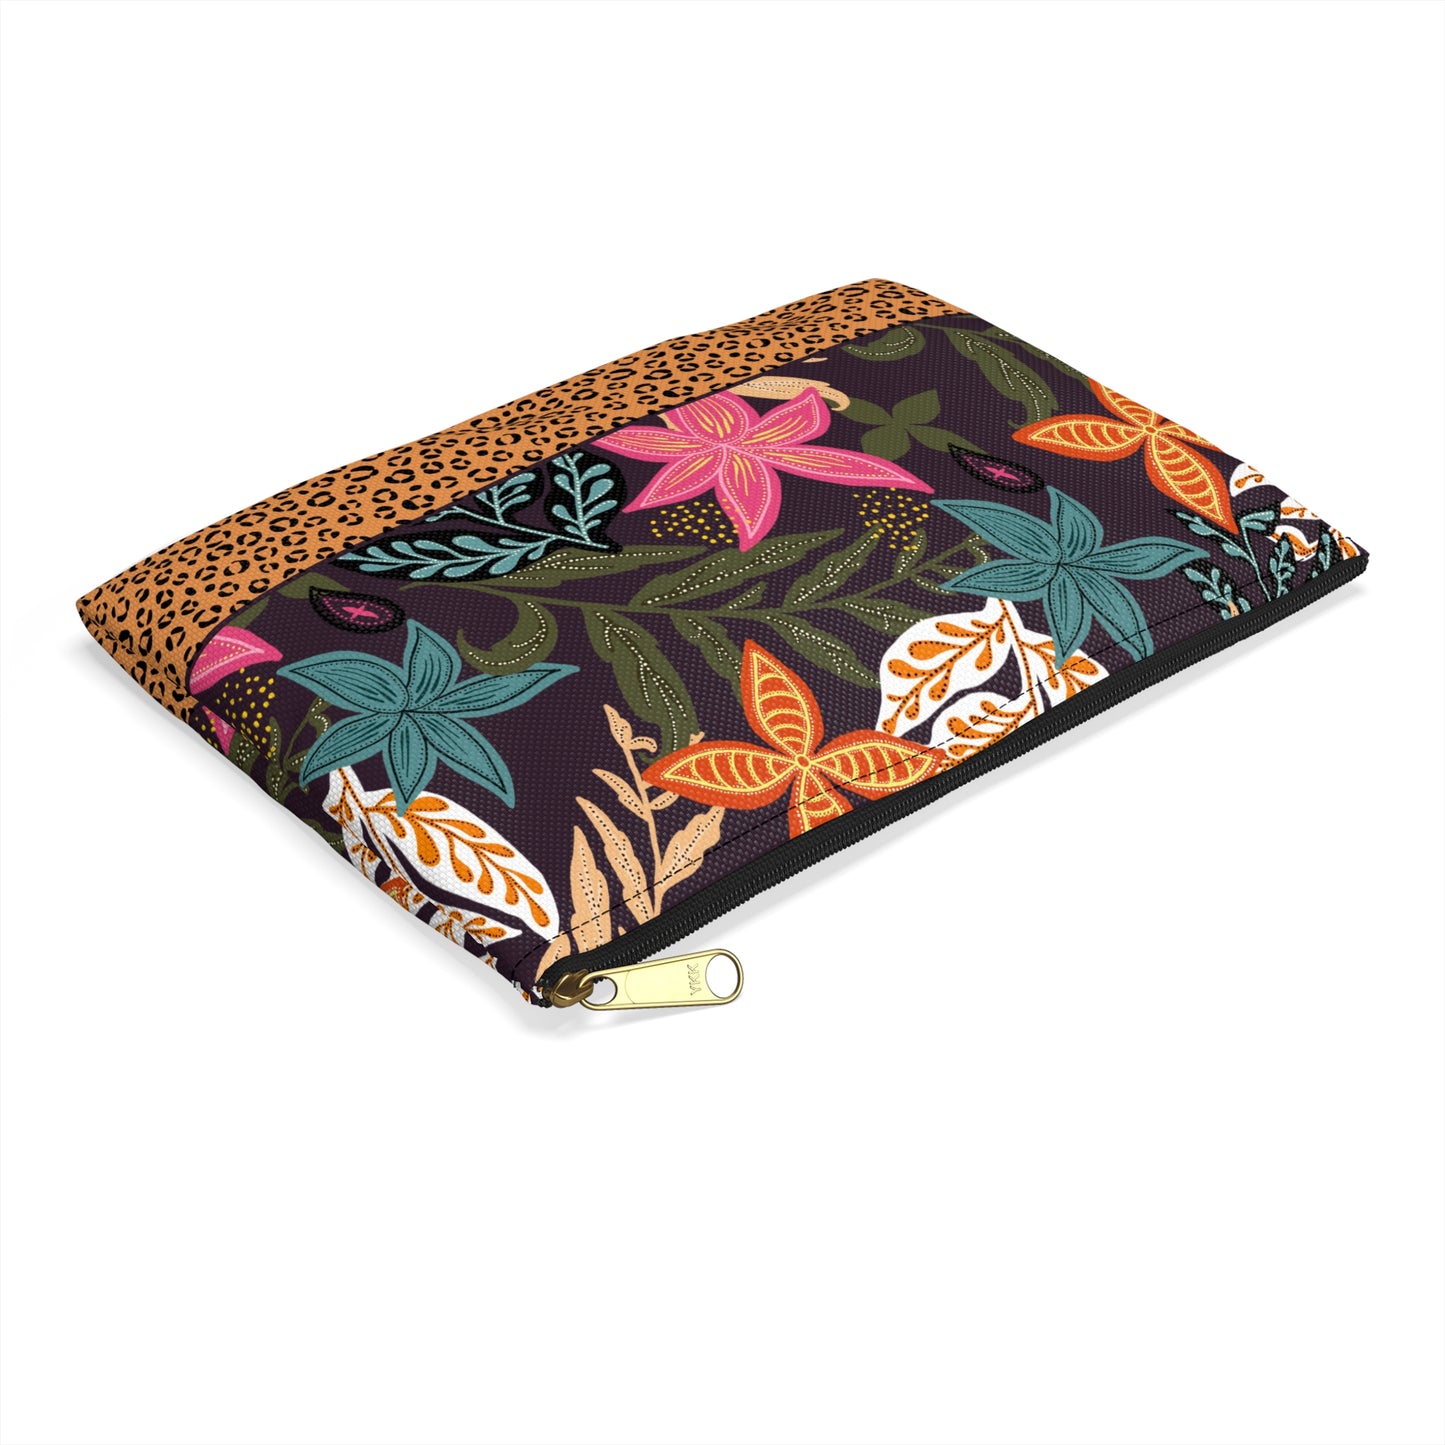 SUMMER JUNGLE Accessory Pouch: Toiletries Bag, On-the-go Items, Everyday Bag